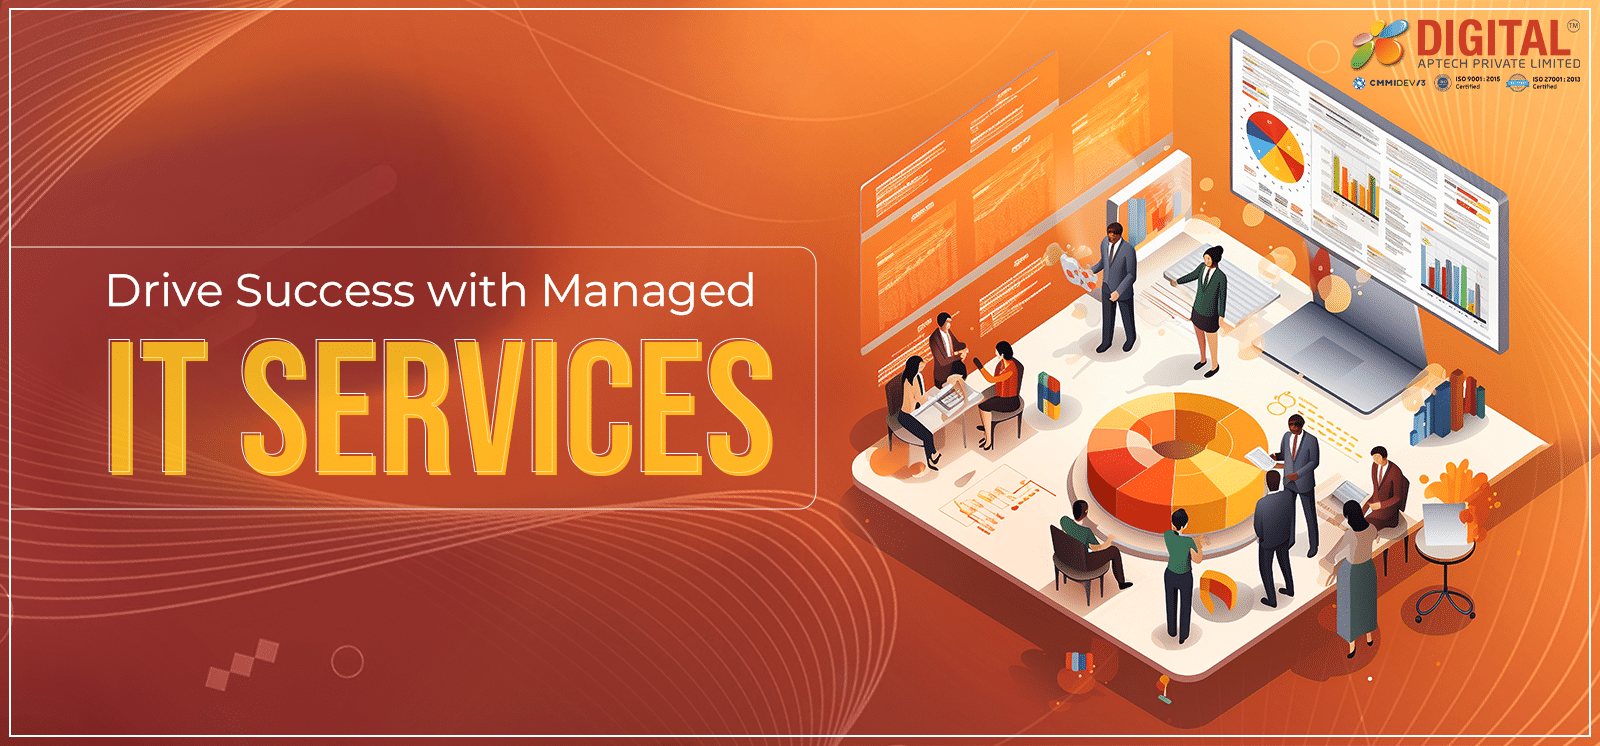 Drive Success with Managed IT Services